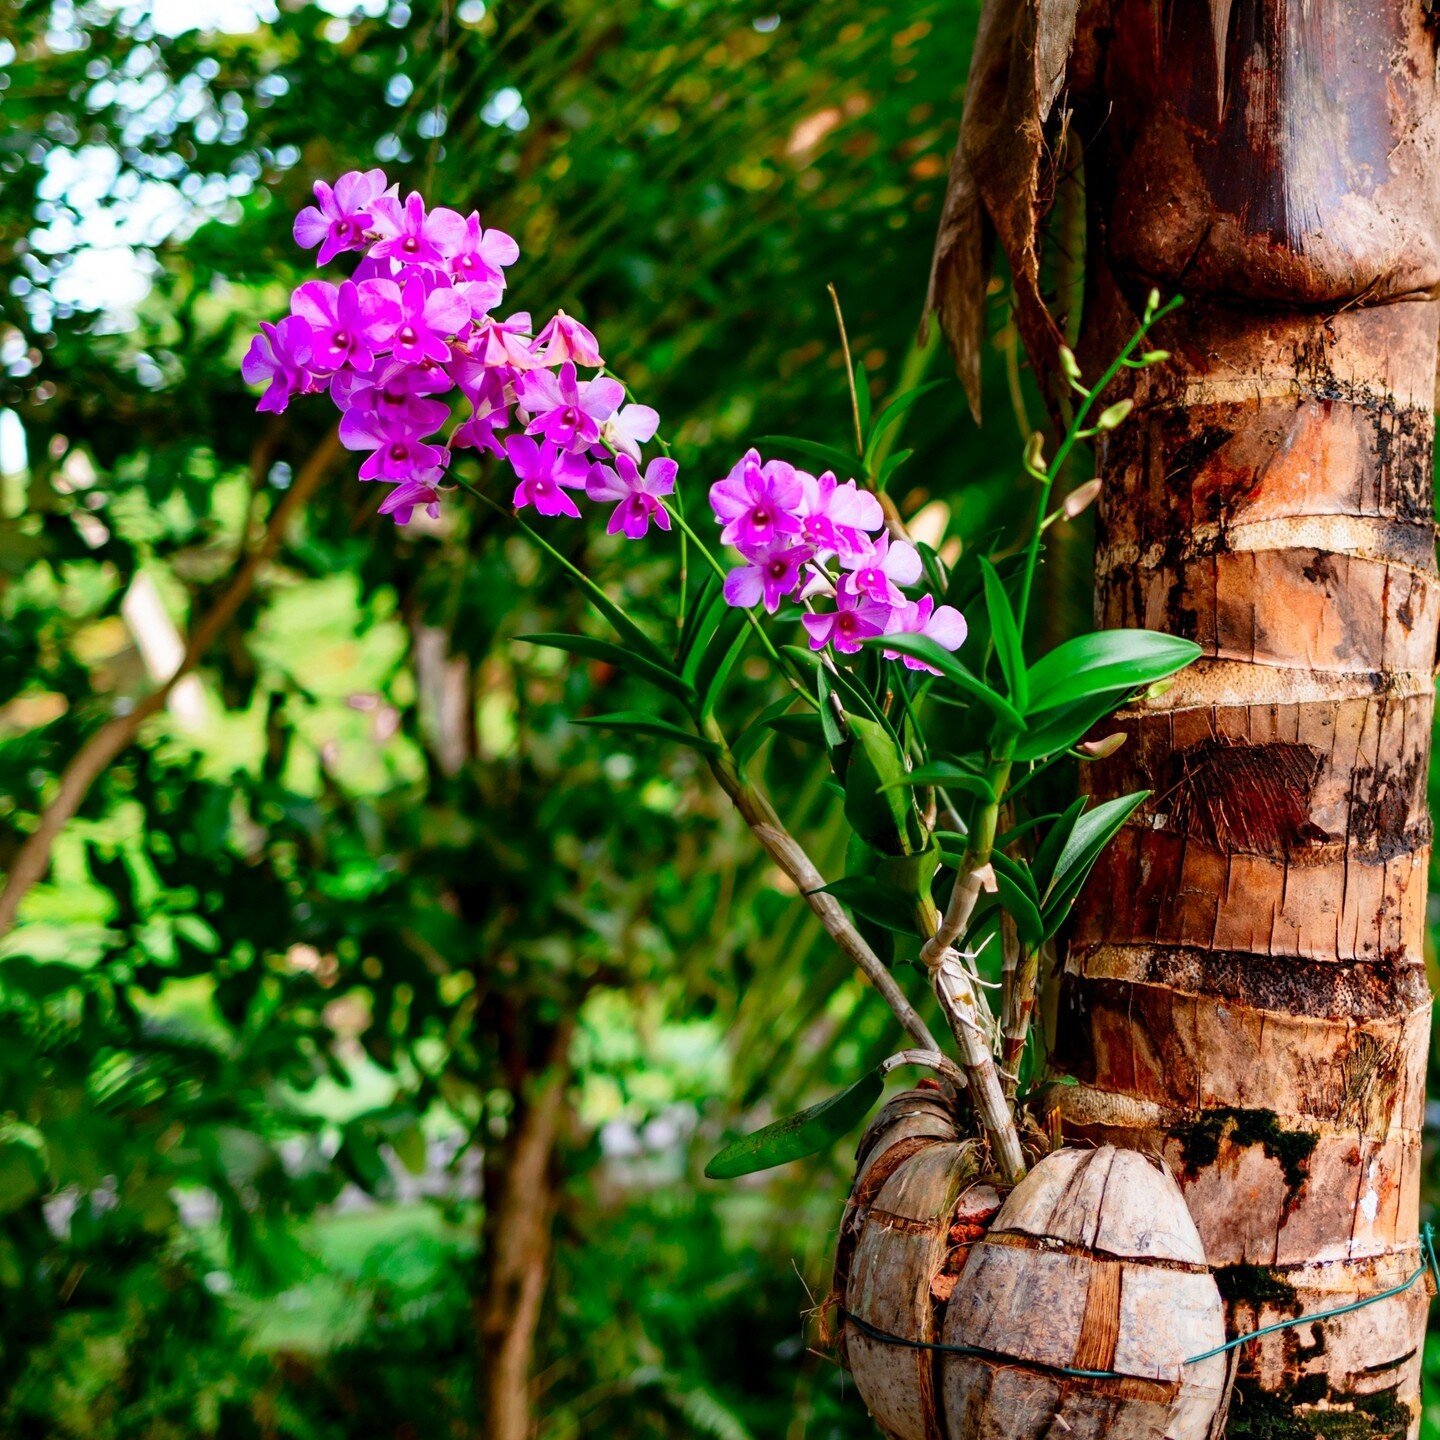 Have you ever explored the Queen Elizabeth II Botanic Park here in the Cayman Islands? 🌴

If you haven't yet, then why not take a scenic drive out to the park this weekend to enjoy the fantastic florals of their #Orchid Show and Sale! 🌸

⏰ Saturday